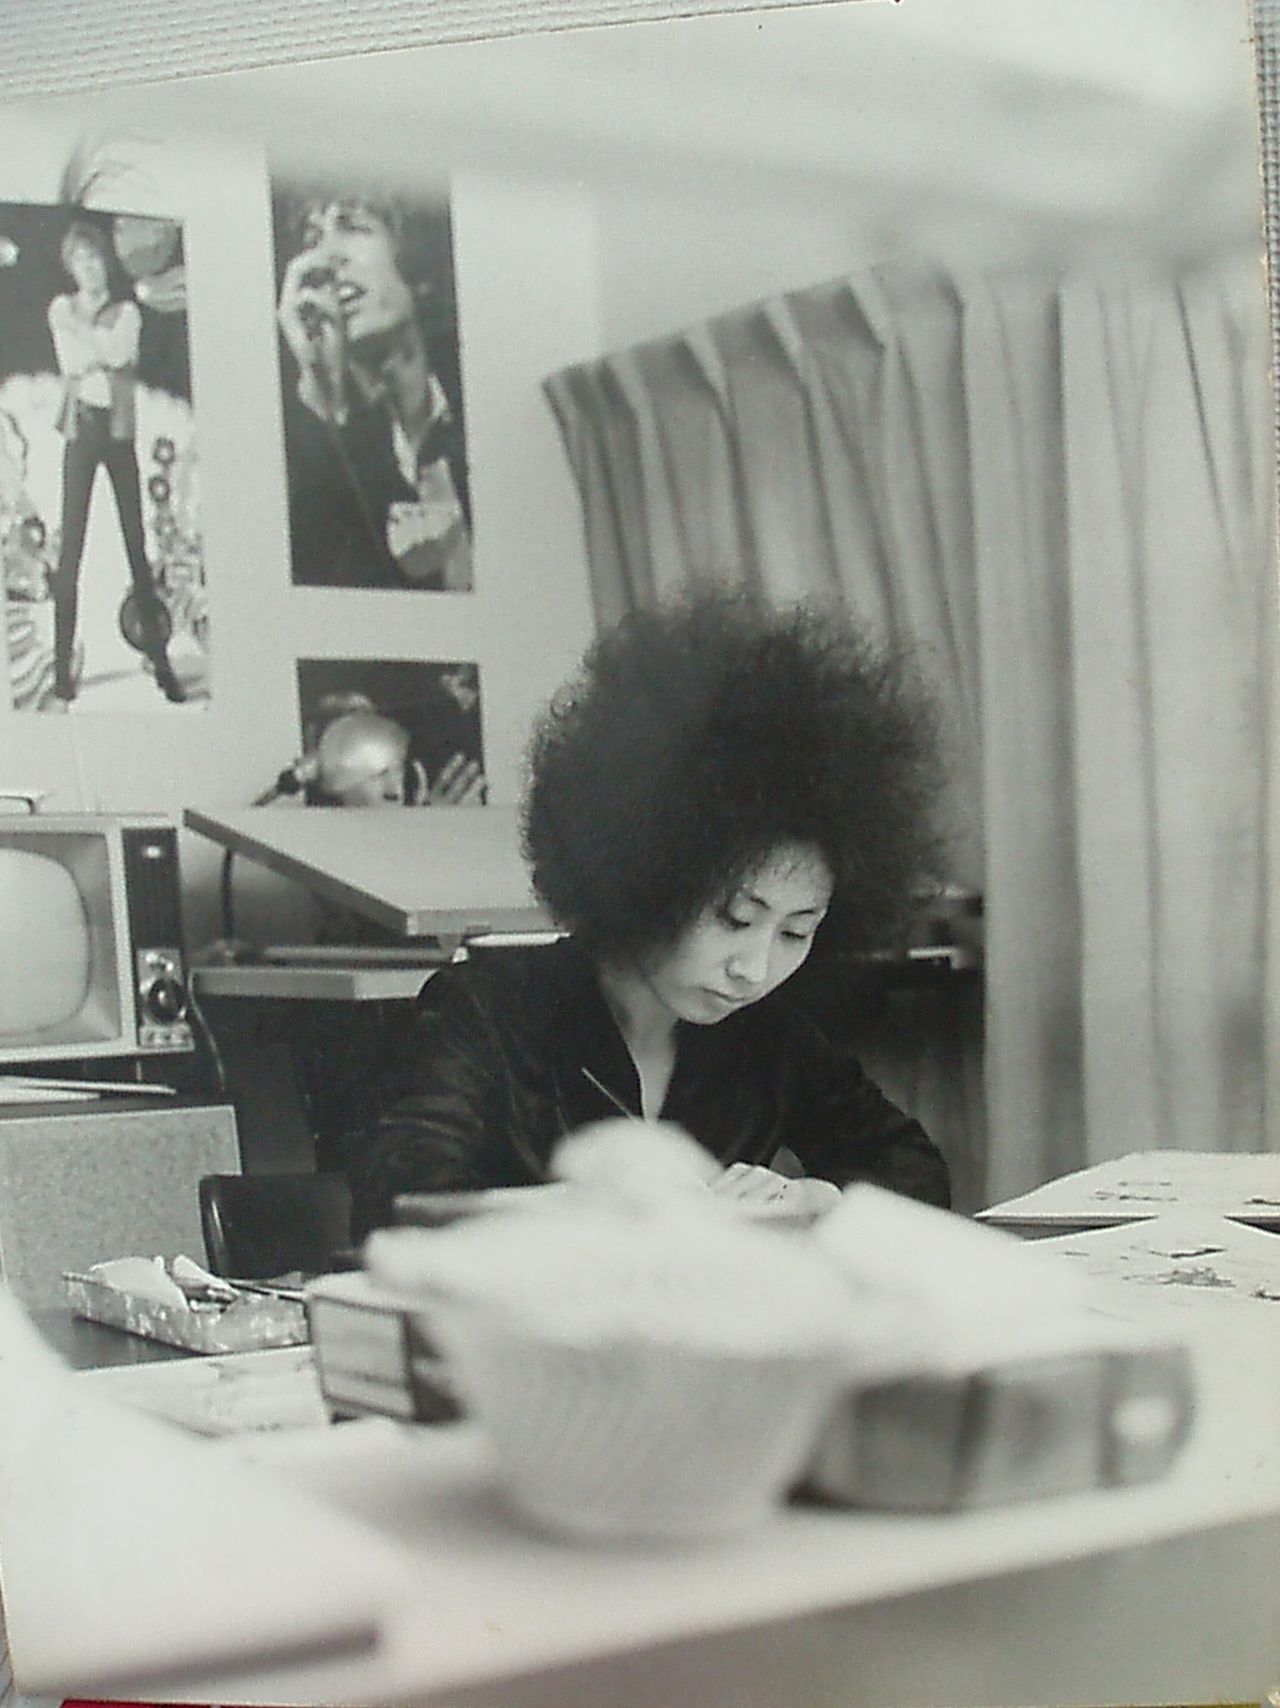 Mizuno at her desk, writing Faiyā! A poster of Scott Walker is on the wall behind her. (Courtesy of Mizuno Hideko)